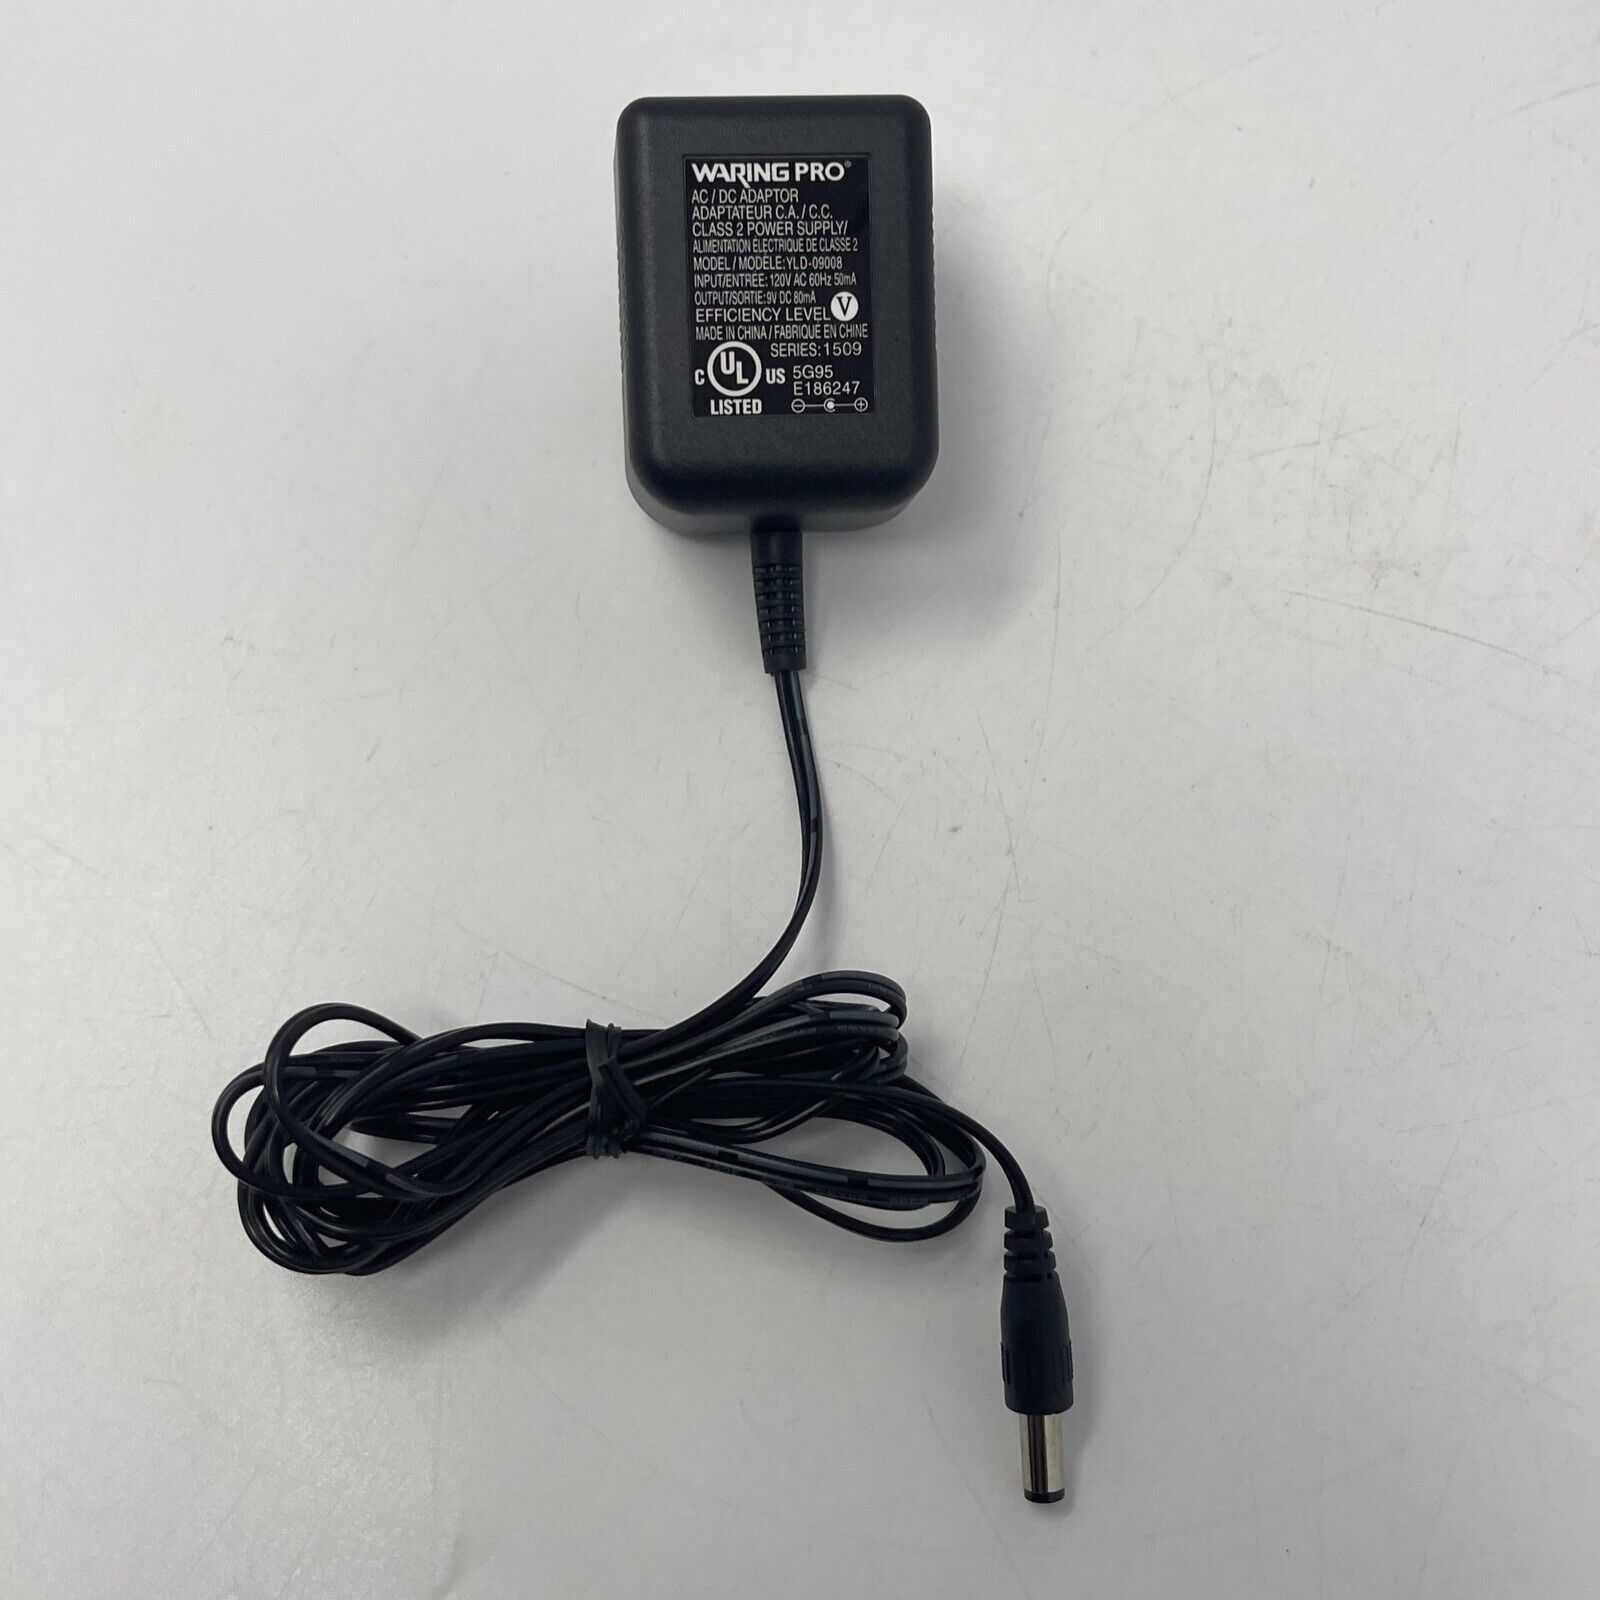 Waring Pro AC DC Adapter Power Supply YLD-09008 Series 1509 9V 80mA Brand: Unbranded Type: AC/DC Adapter Features: